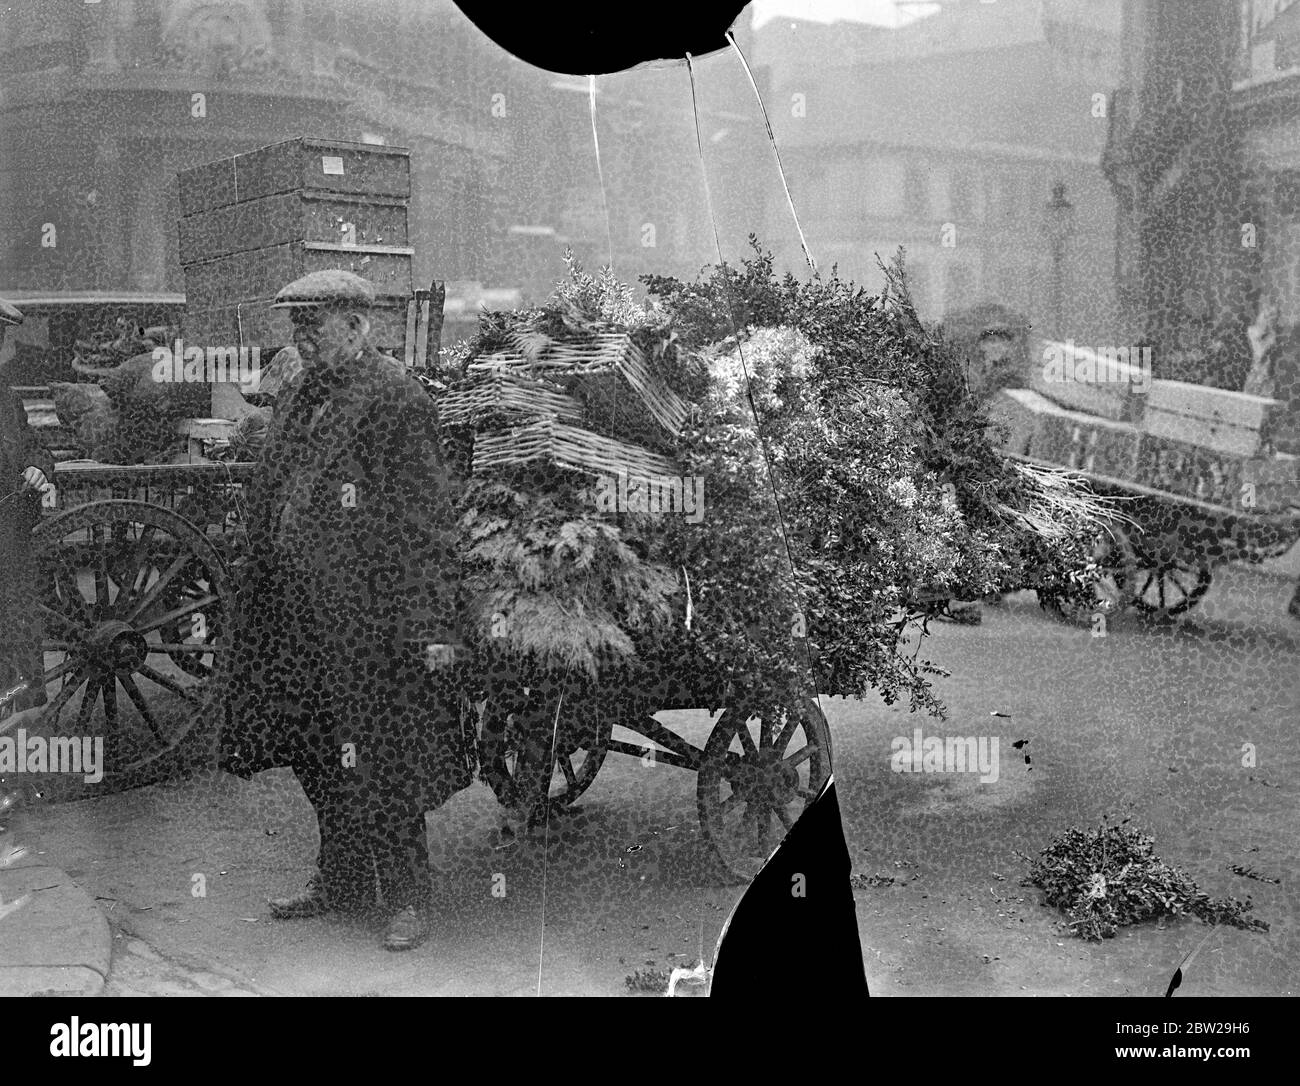 Supplying London with Holly. Covent Garden in the middle of its Christmas rush. Large quantities of Holly and Christmas trees are now passing through Covent Garden market to satisfy the big Christmas demand.. Photo shows, a porter with a barrowload of Holly and Christmas trees at the Covent Garden. 8 December 1937 Stock Photo